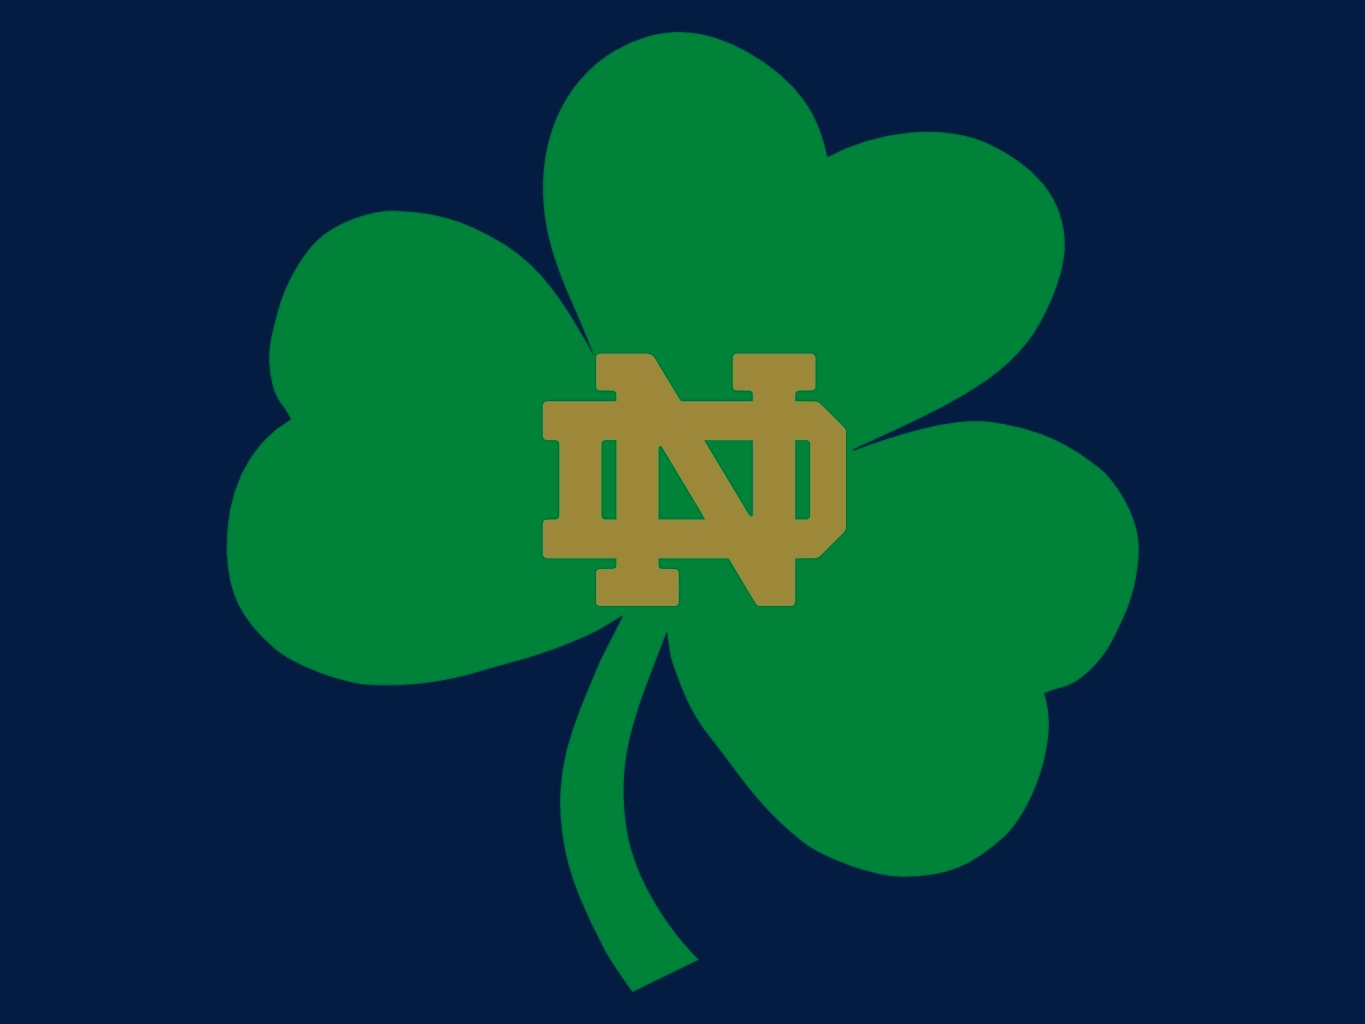 Irish Envy Notre Dame Football Discussion Outside The Lines